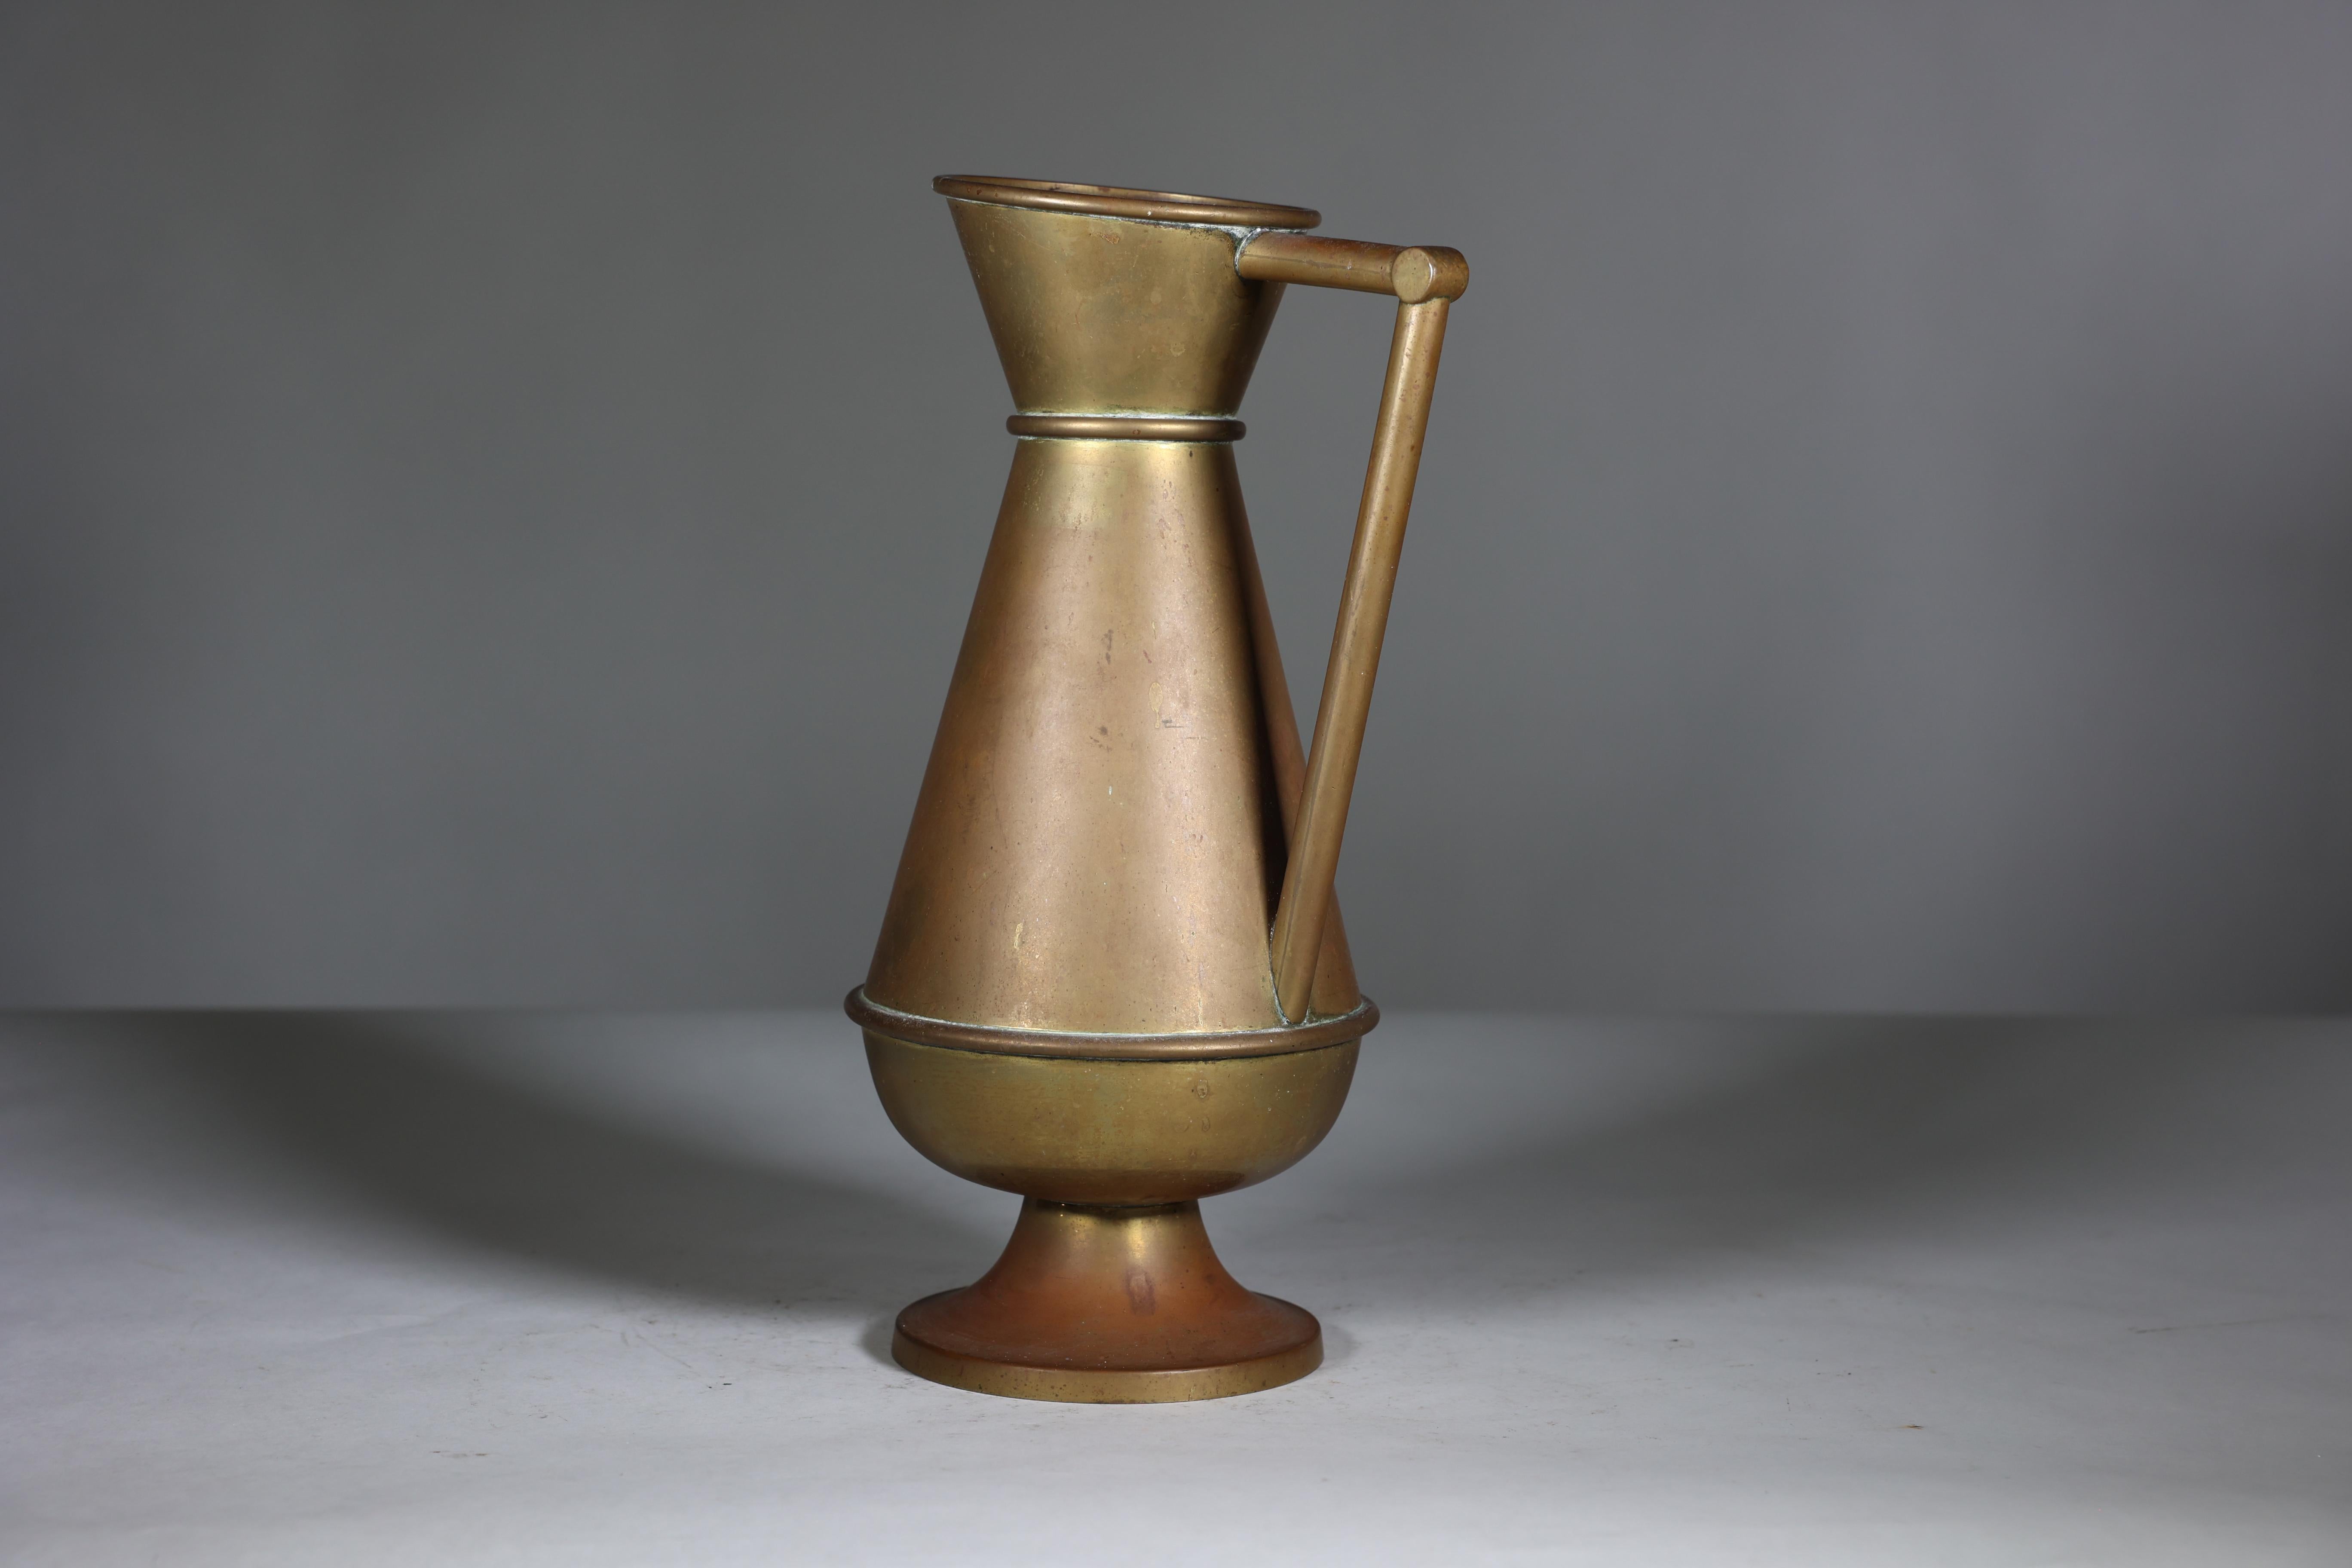 English A large Gothic Revival heavy brass jug with a simple angular form and handle. For Sale